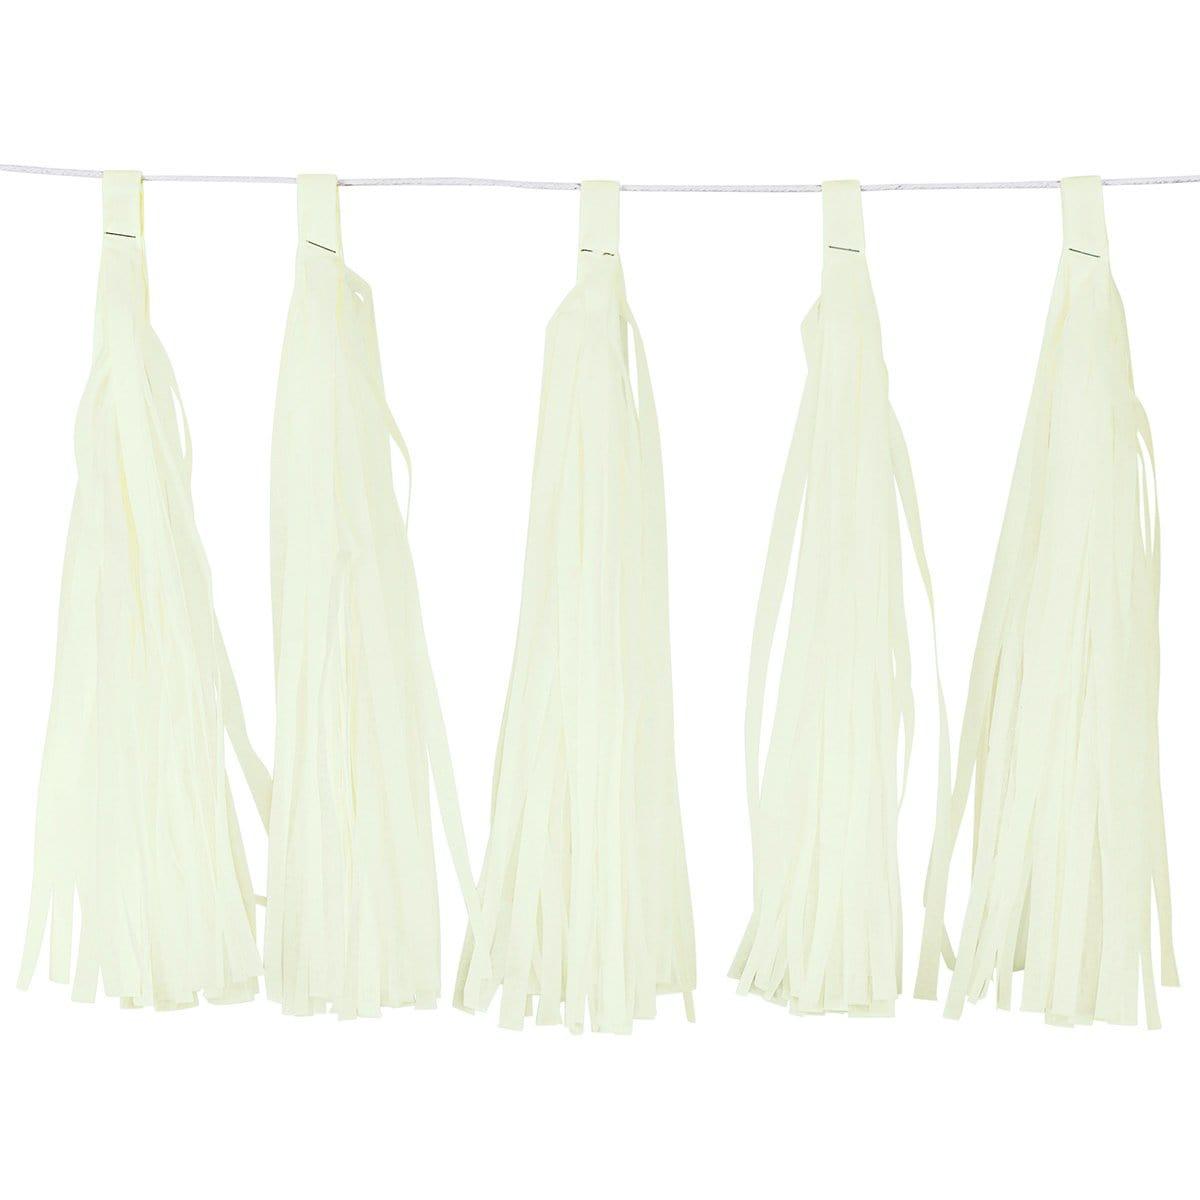 Buy Decorations Tassels Garland Silk Paper Assembled 10/Pkg - Ivory sold at Party Expert